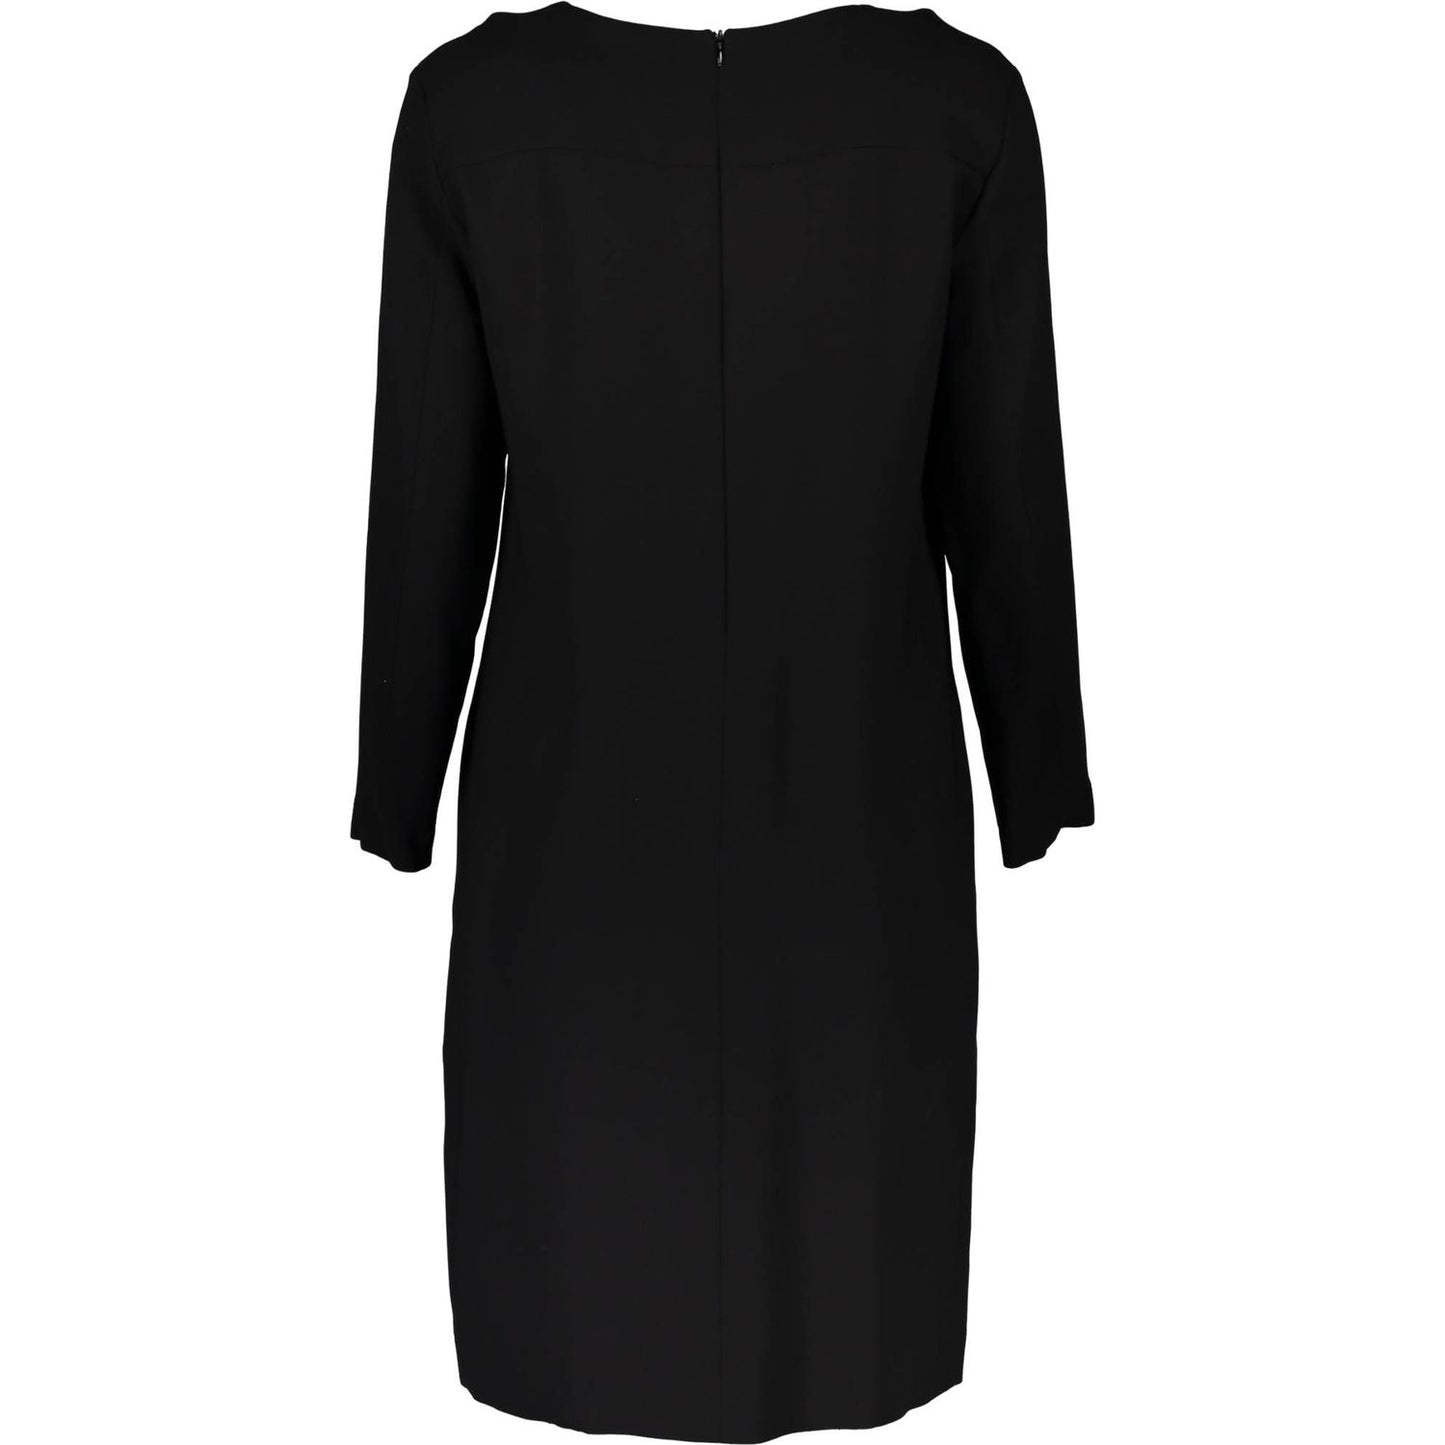 Gant Chic Black Short Dress with Long Sleeves chic-black-short-dress-with-long-sleeves